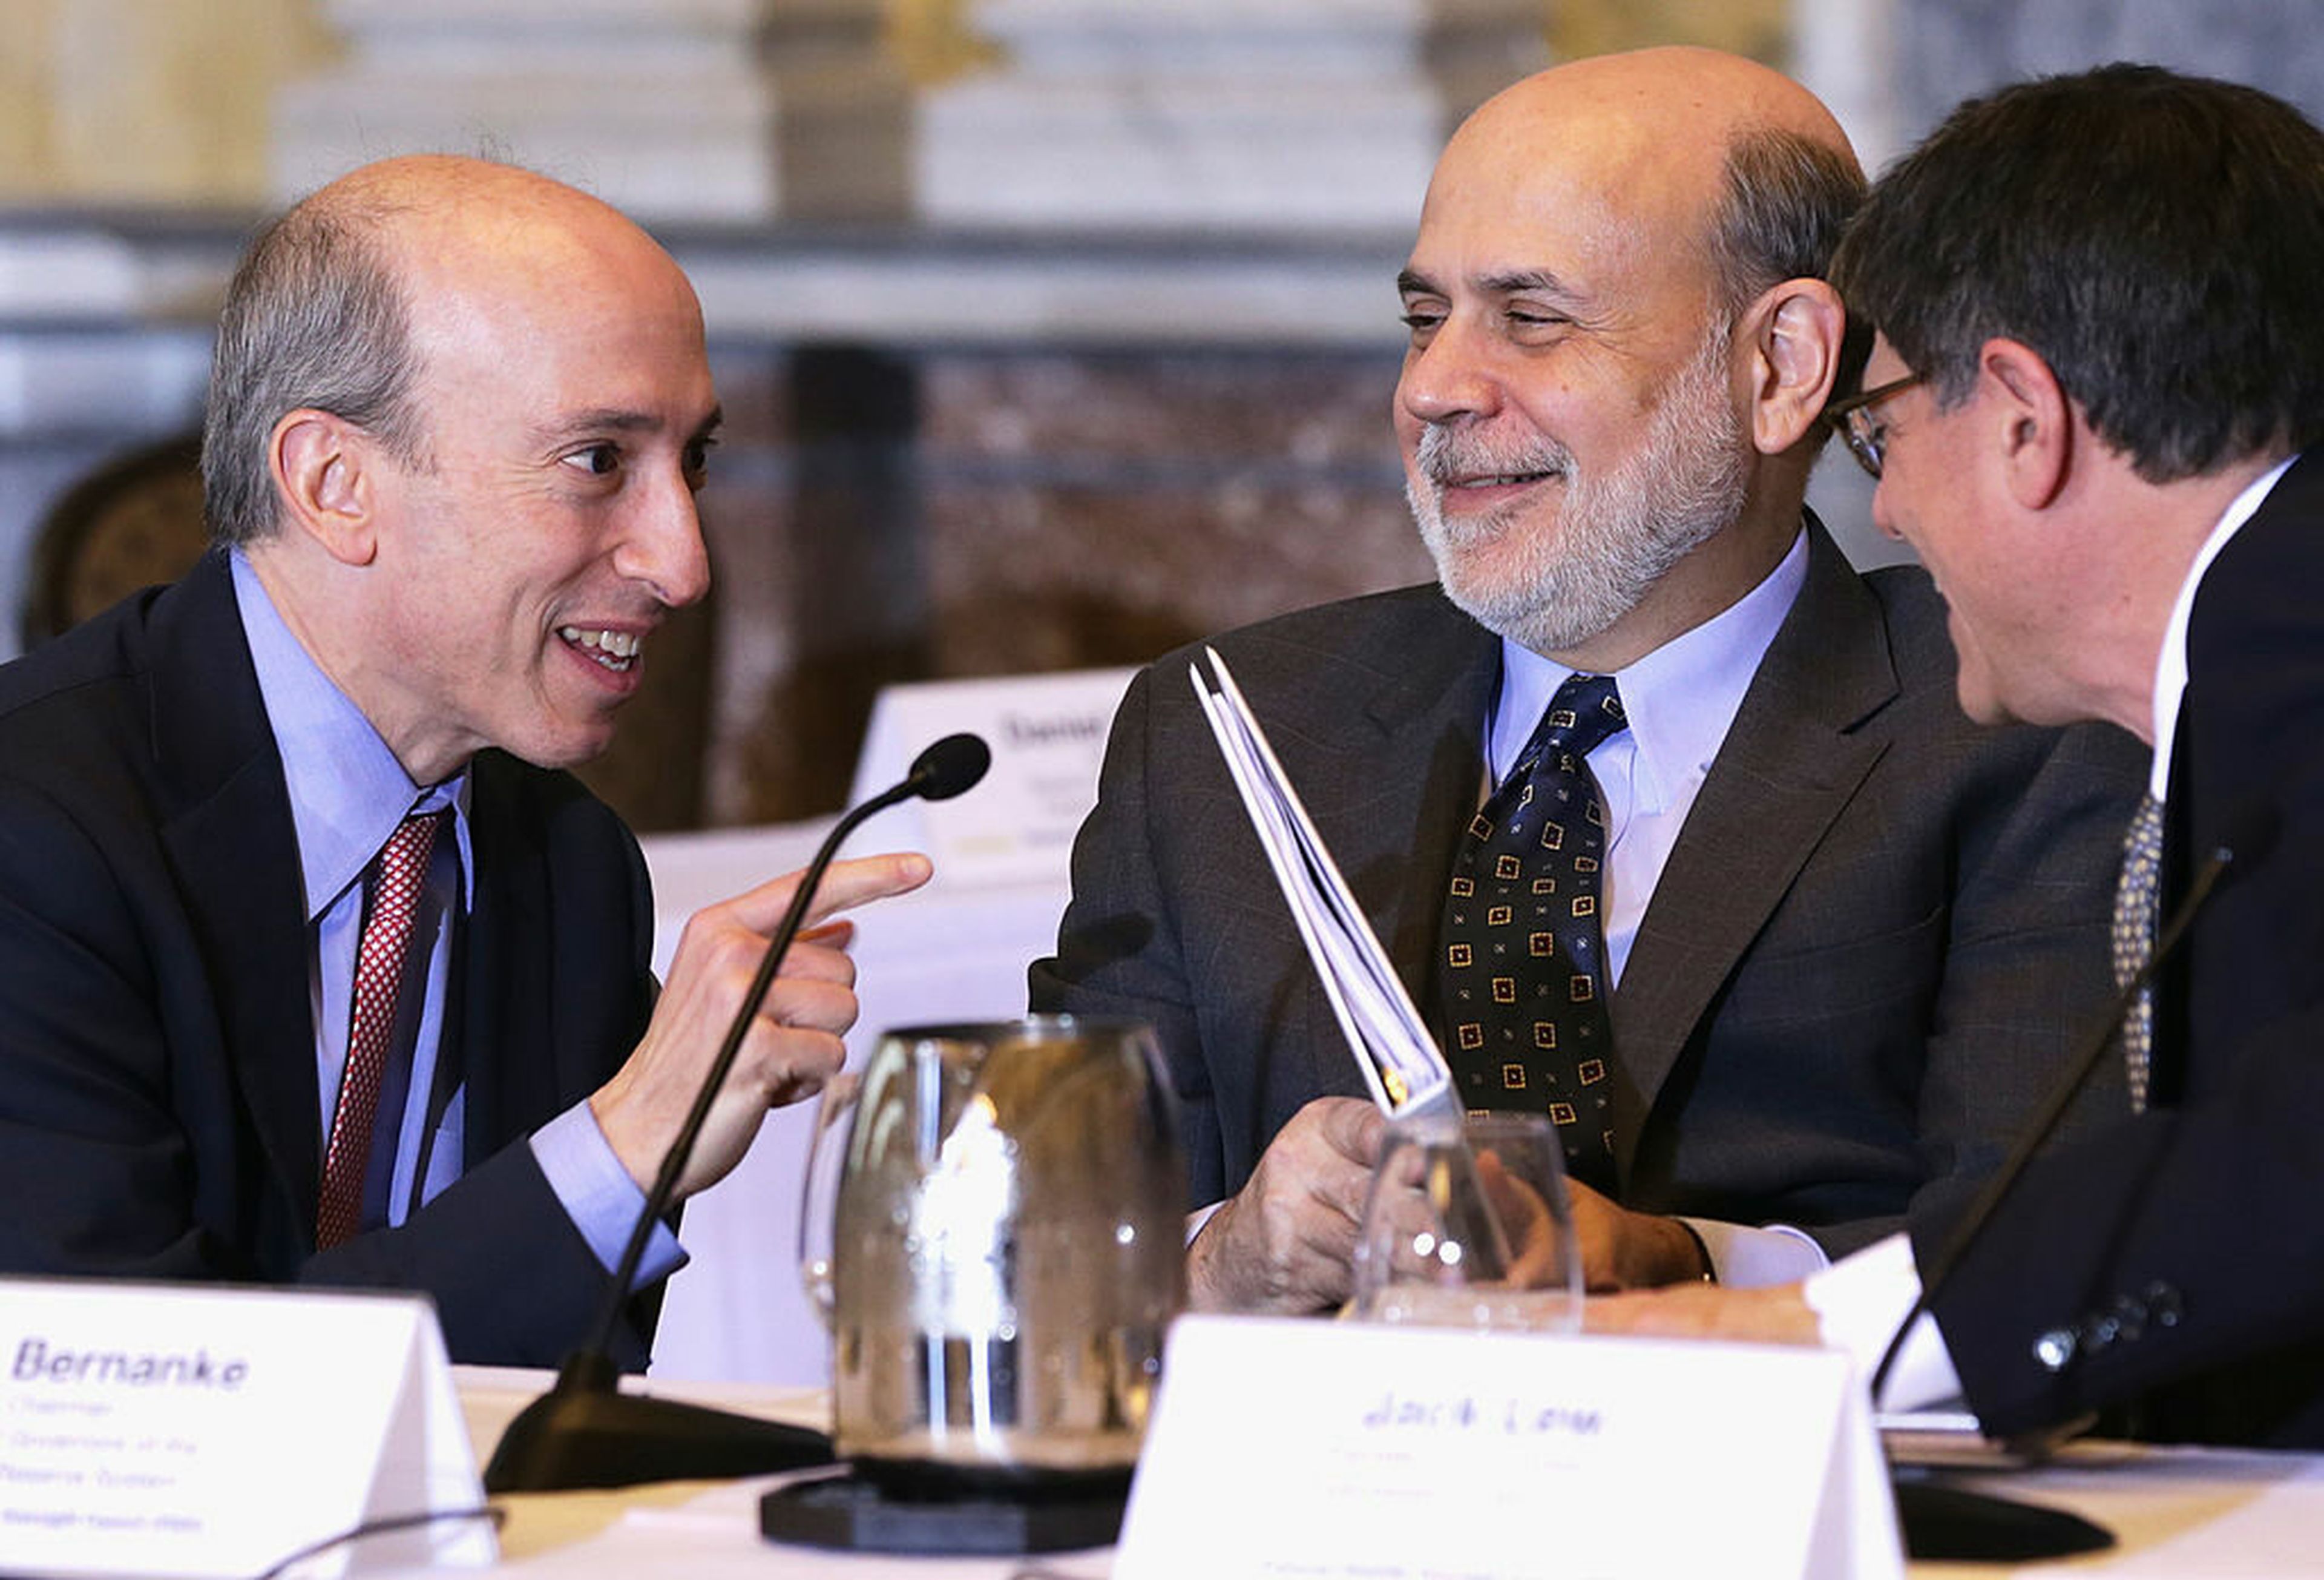 Securities and Exchange Commission Chair Gary Gensler (Left) speaks with Federal Reserve Board Chairman Ben Bernanke (Middle) and U.S. Secretary of the Treasury Jacob Lew (Right). The Securities and Exchange Commission formally proposed a new set of regulations that would impose sweeping transparency requirements around the cybersecurity operations...